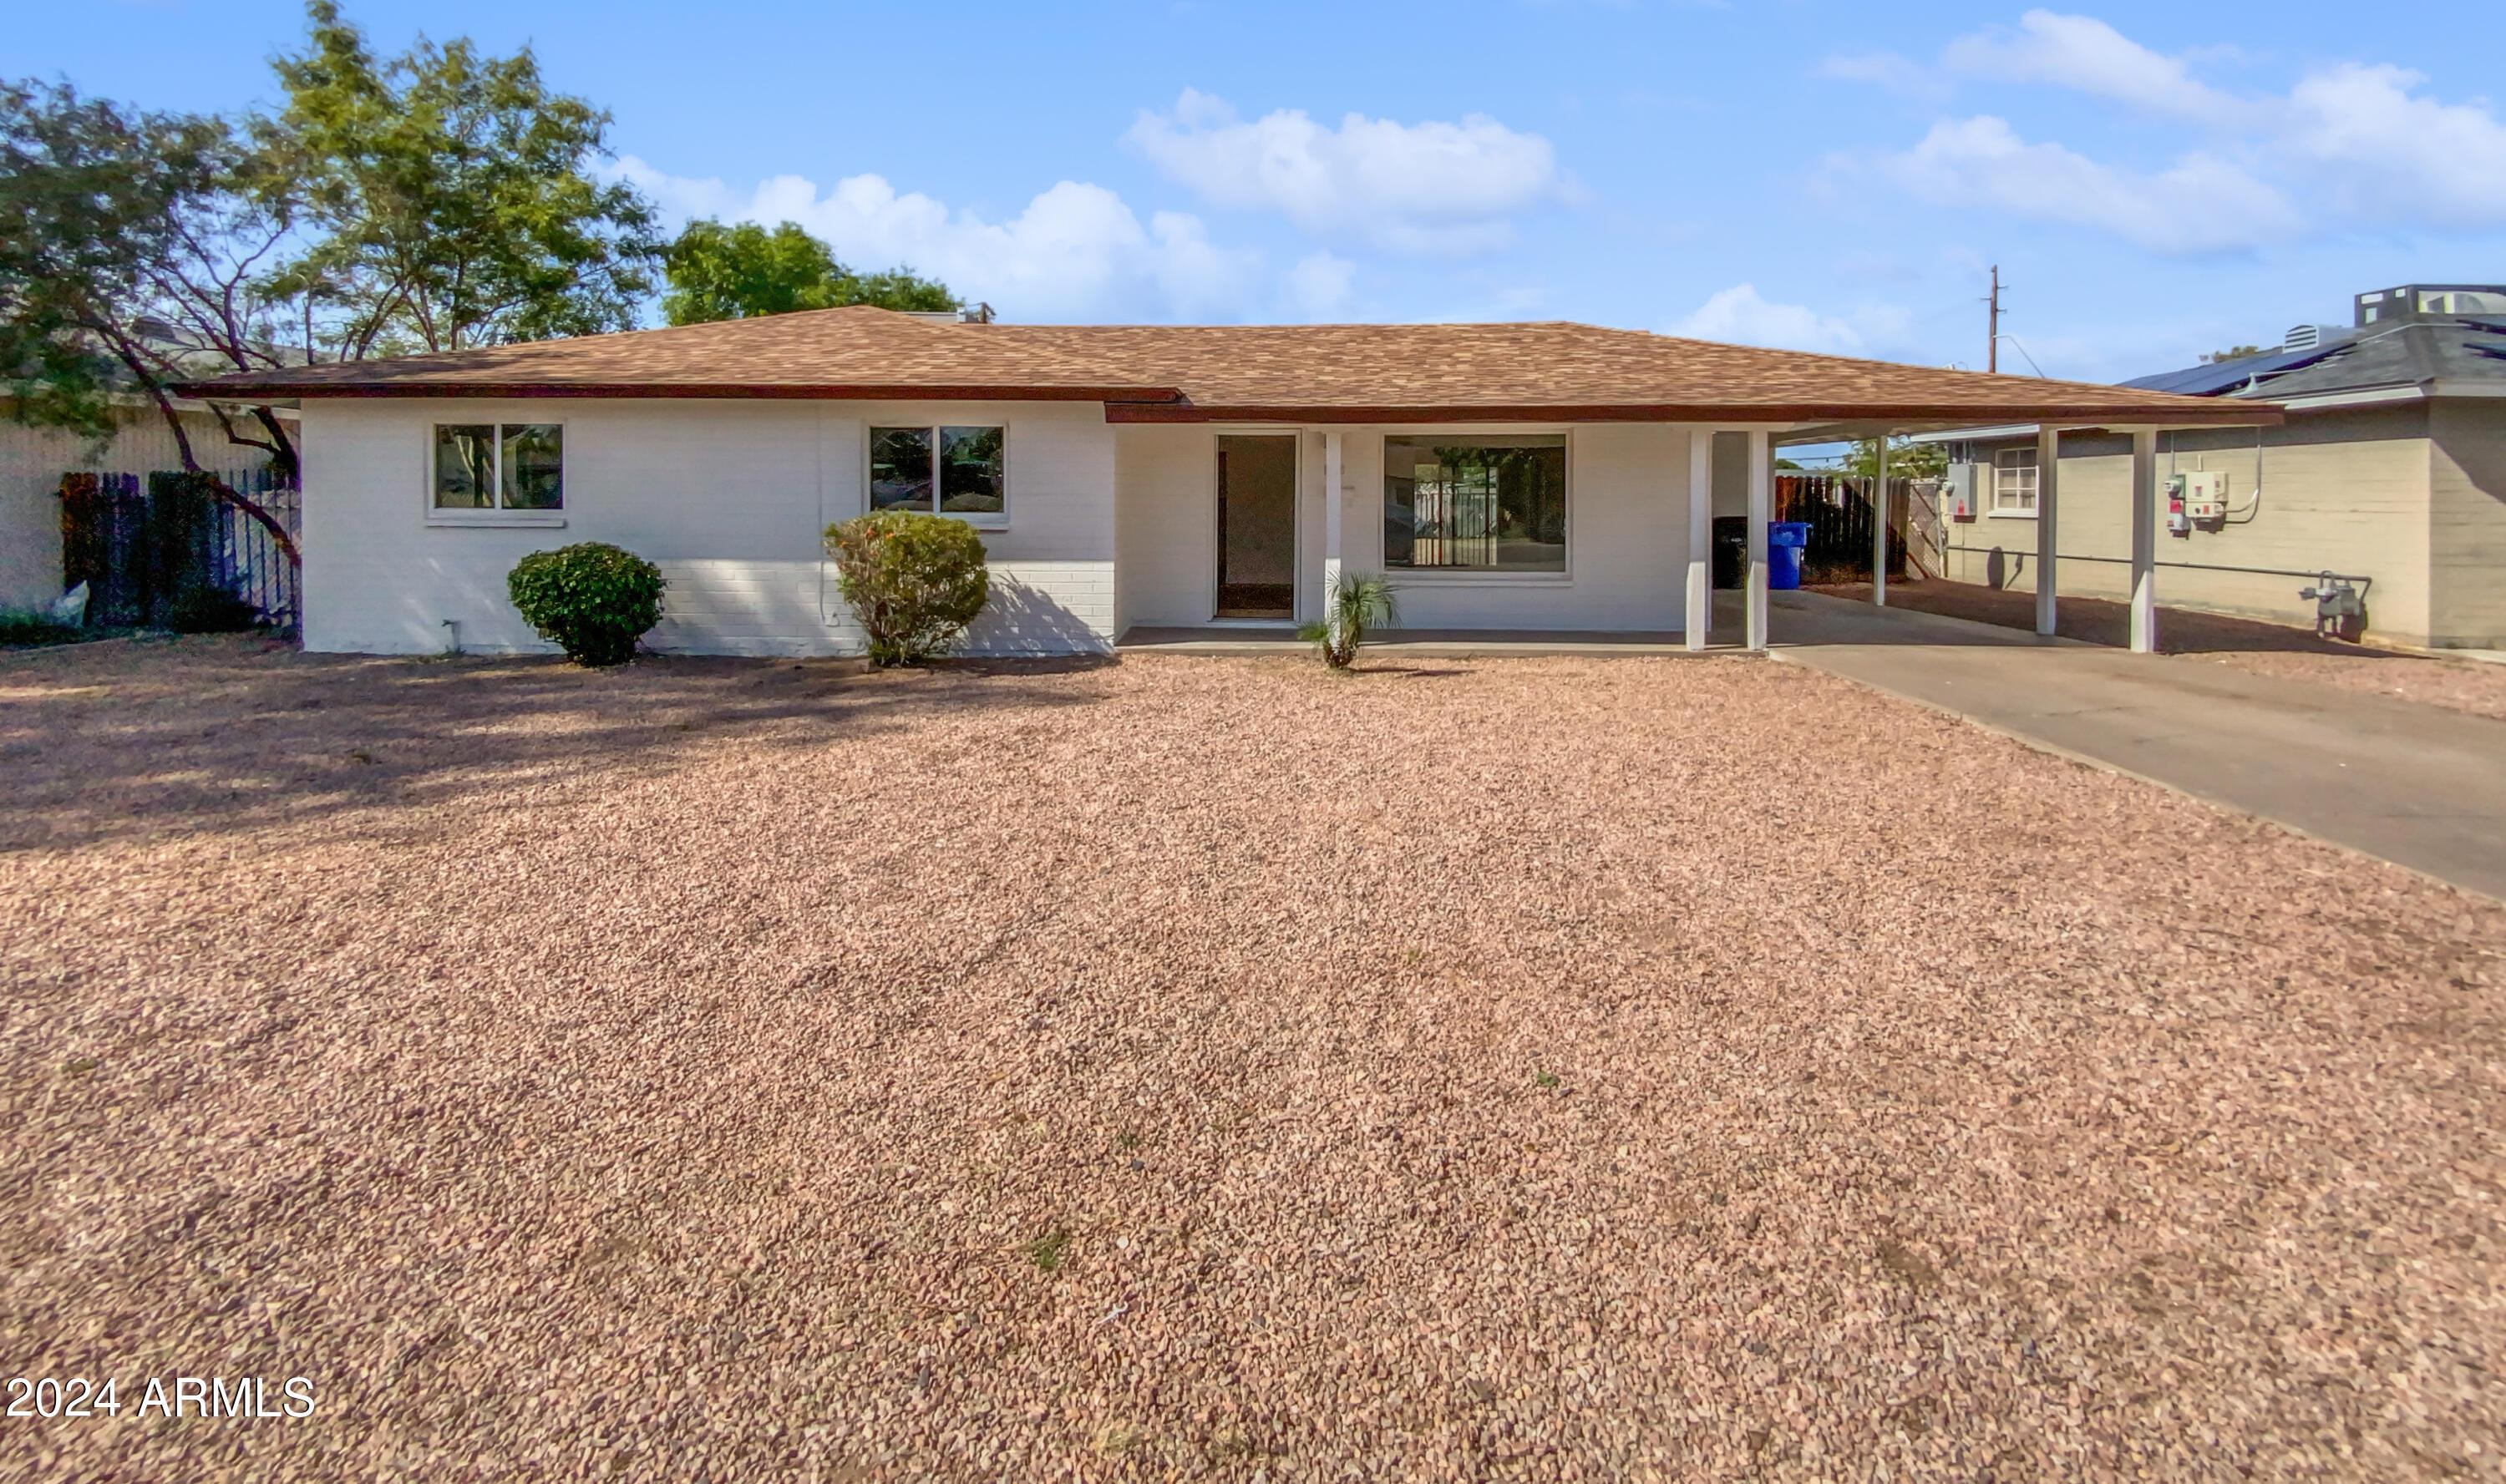 Photo one of 1158 E Jarvis Ave Mesa AZ 85204 | MLS 6689028